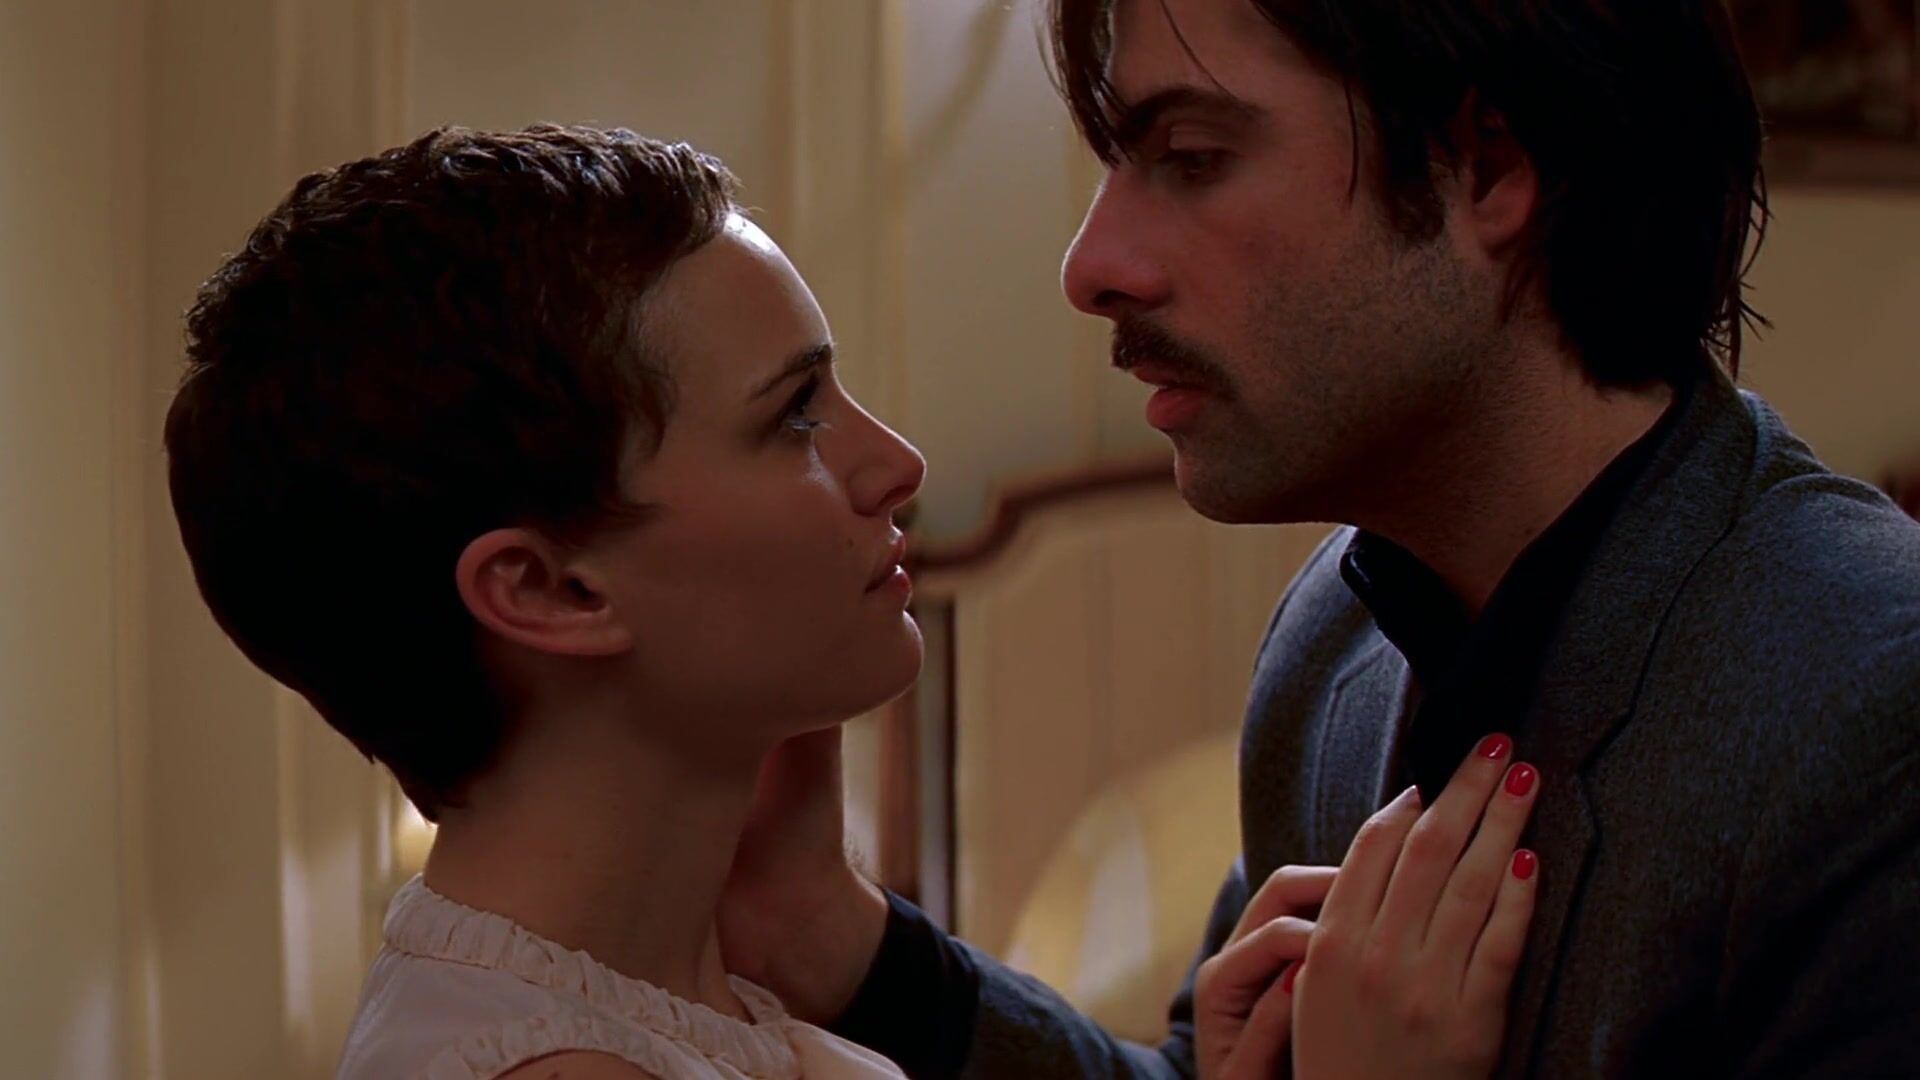 Camera Sexy actress Natalie Portman gives herself to mustachioed guy in Hotel Chevalier (2007) XBiz